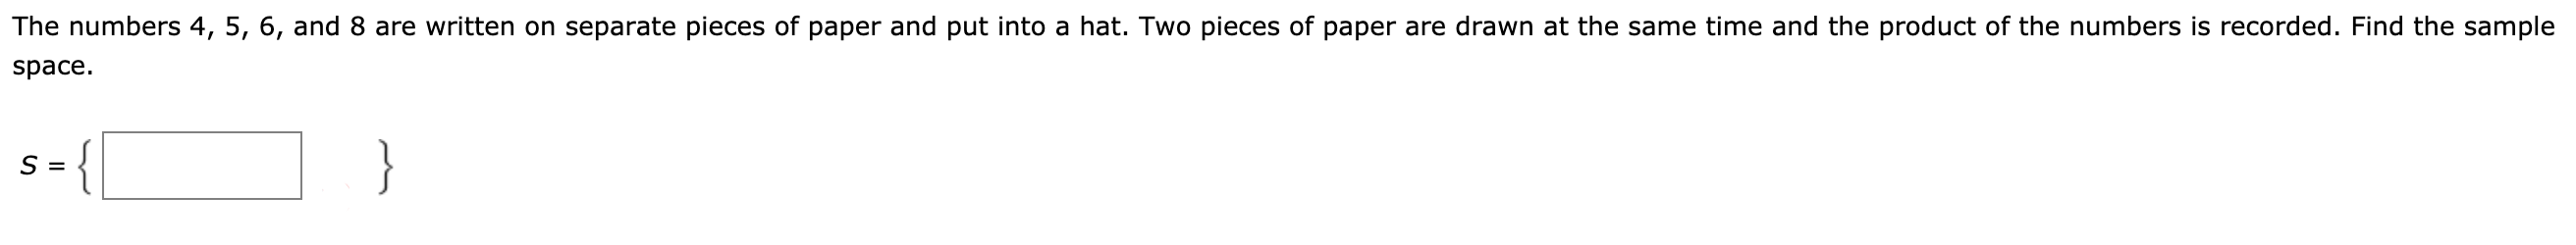 The numbers 4, 5, 6, and 8 are written on separate pieces of paper and put into a hat. Two pieces of paper are drawn at the same time and the product of the numbers is recorded. Find the sample
space.
}
